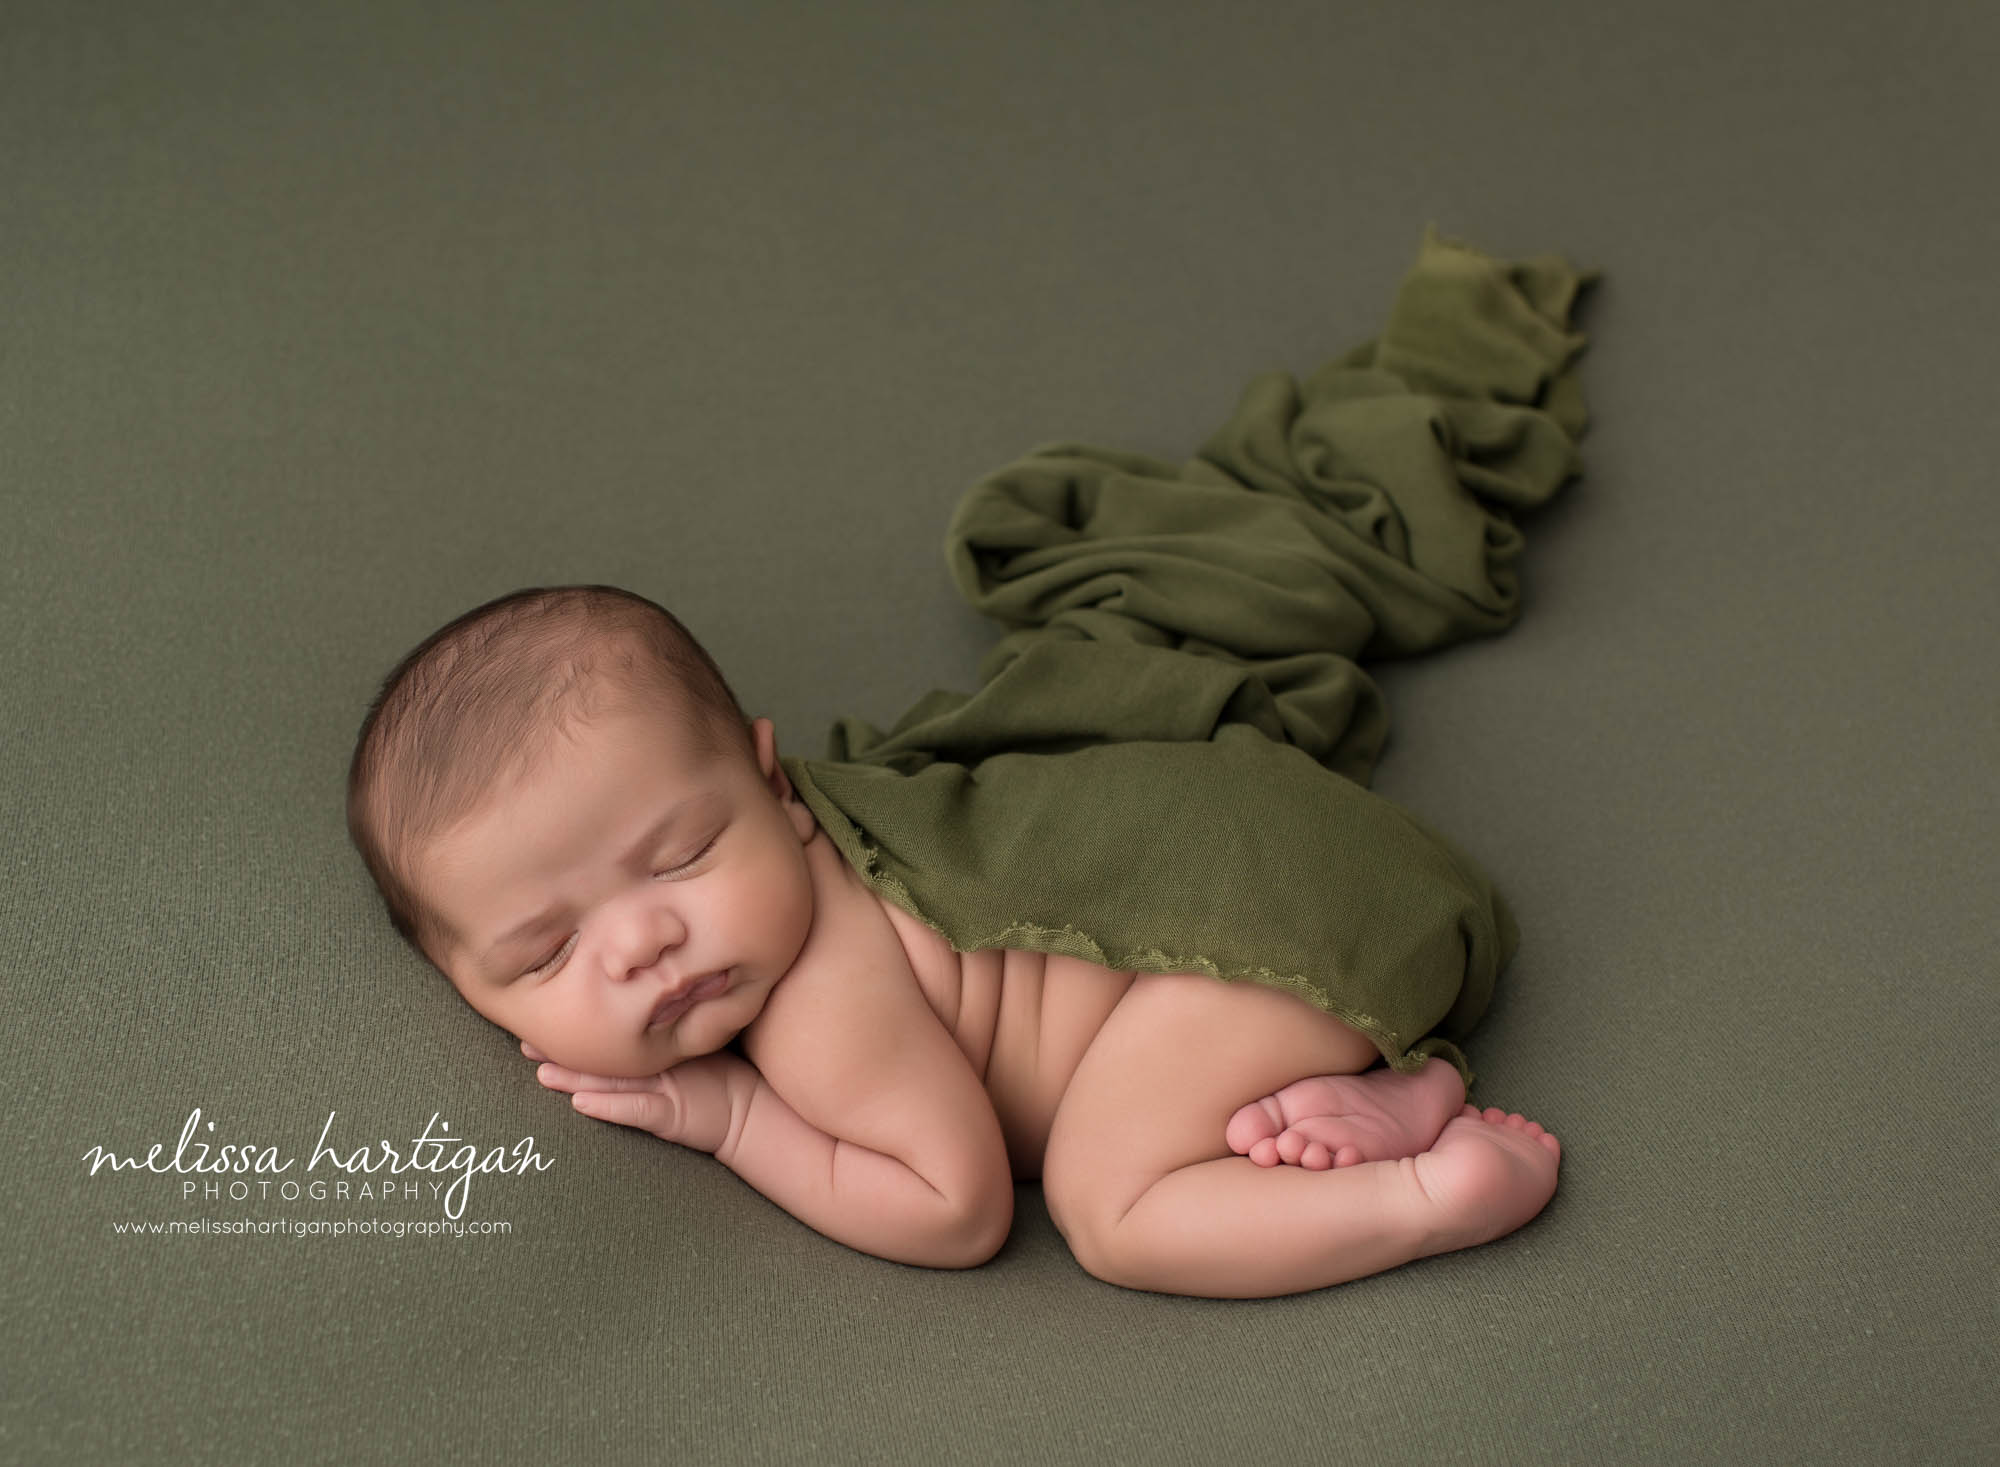 newborn baby boy posed on green backdrop with draping wrap over him ct newborn photography